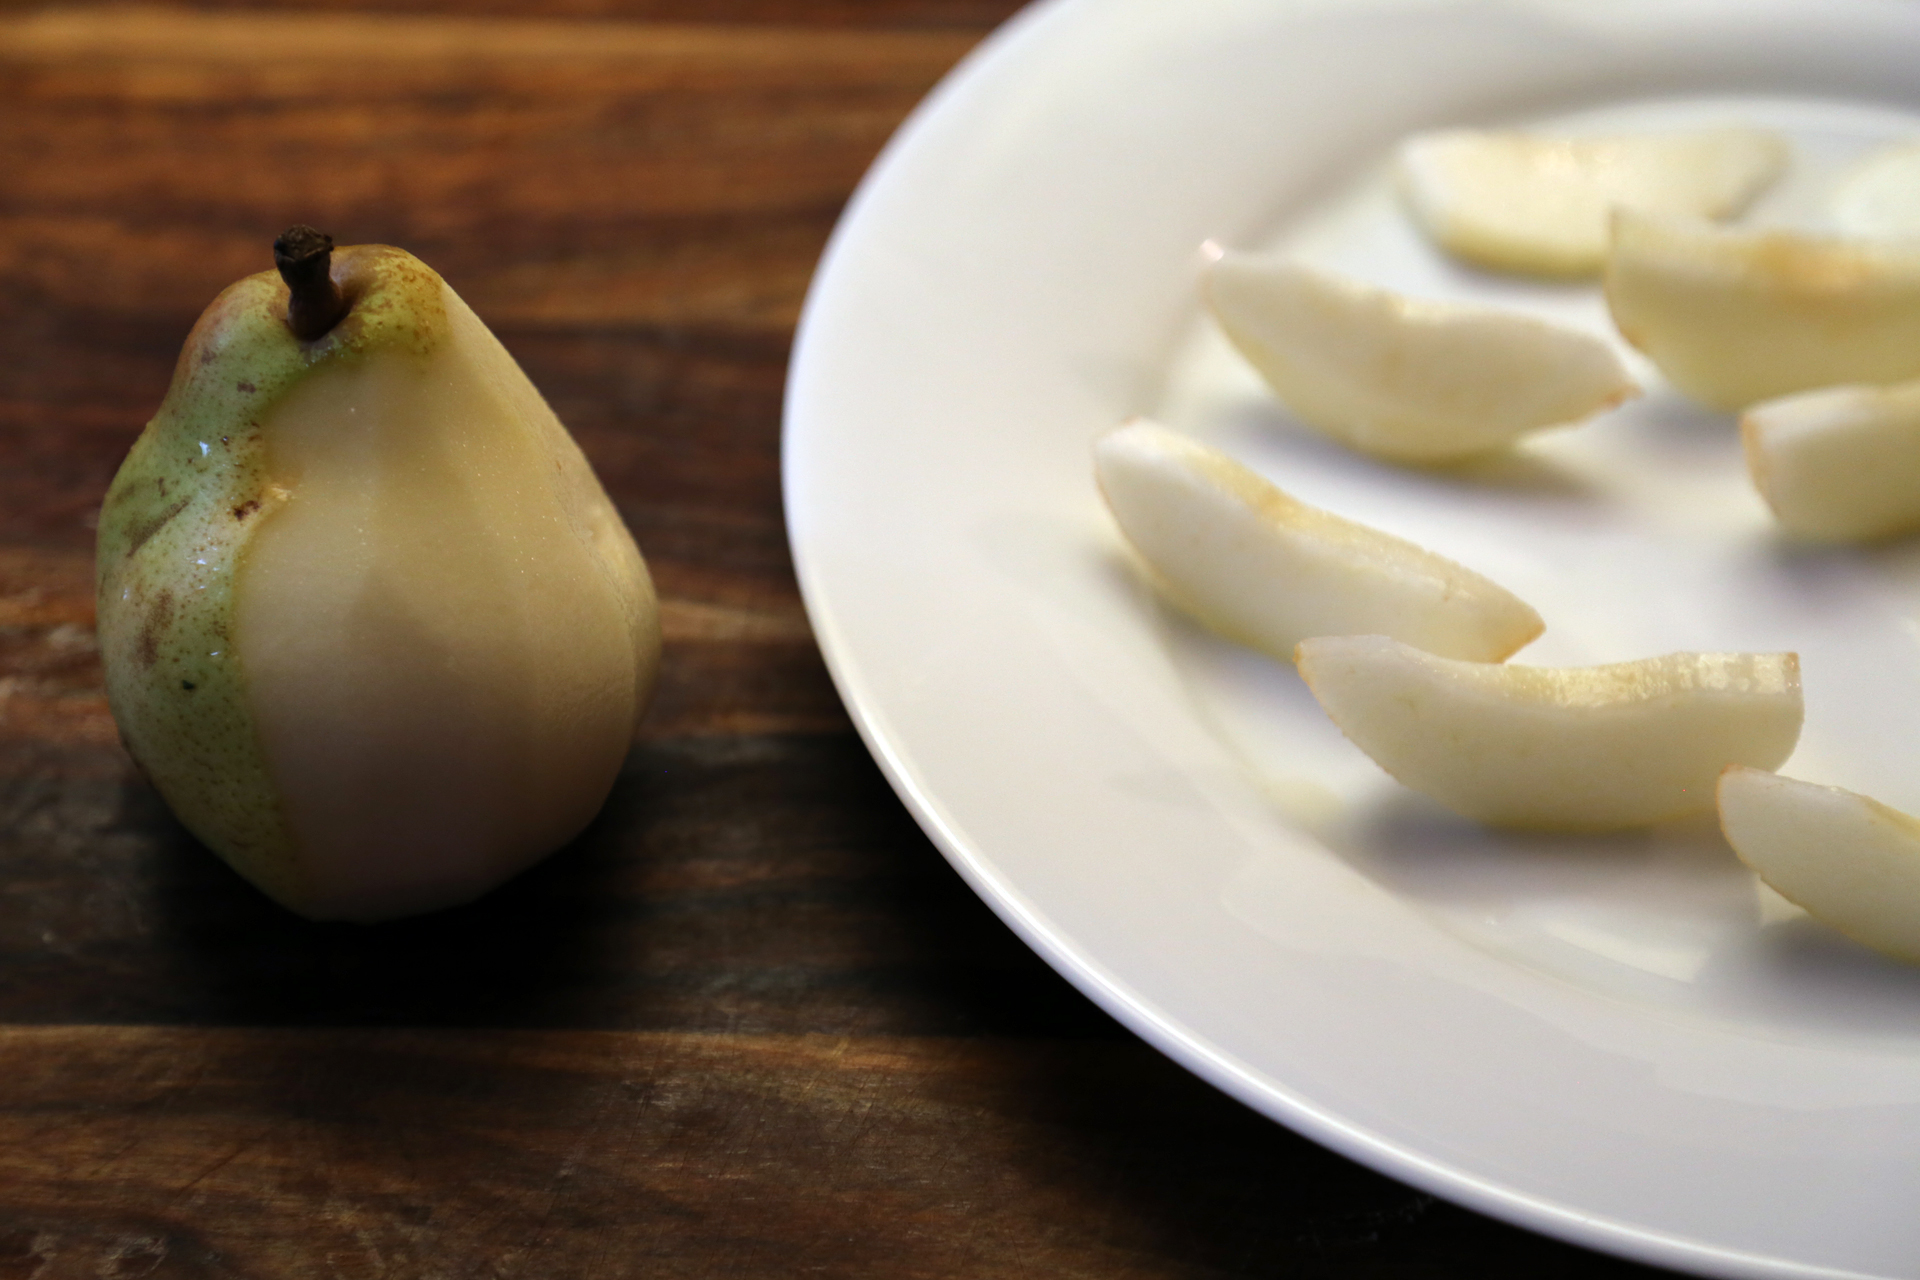 Quarter the pears and cut out the core with a paring knife. Slice each quarter into 1/2-inch wedges.